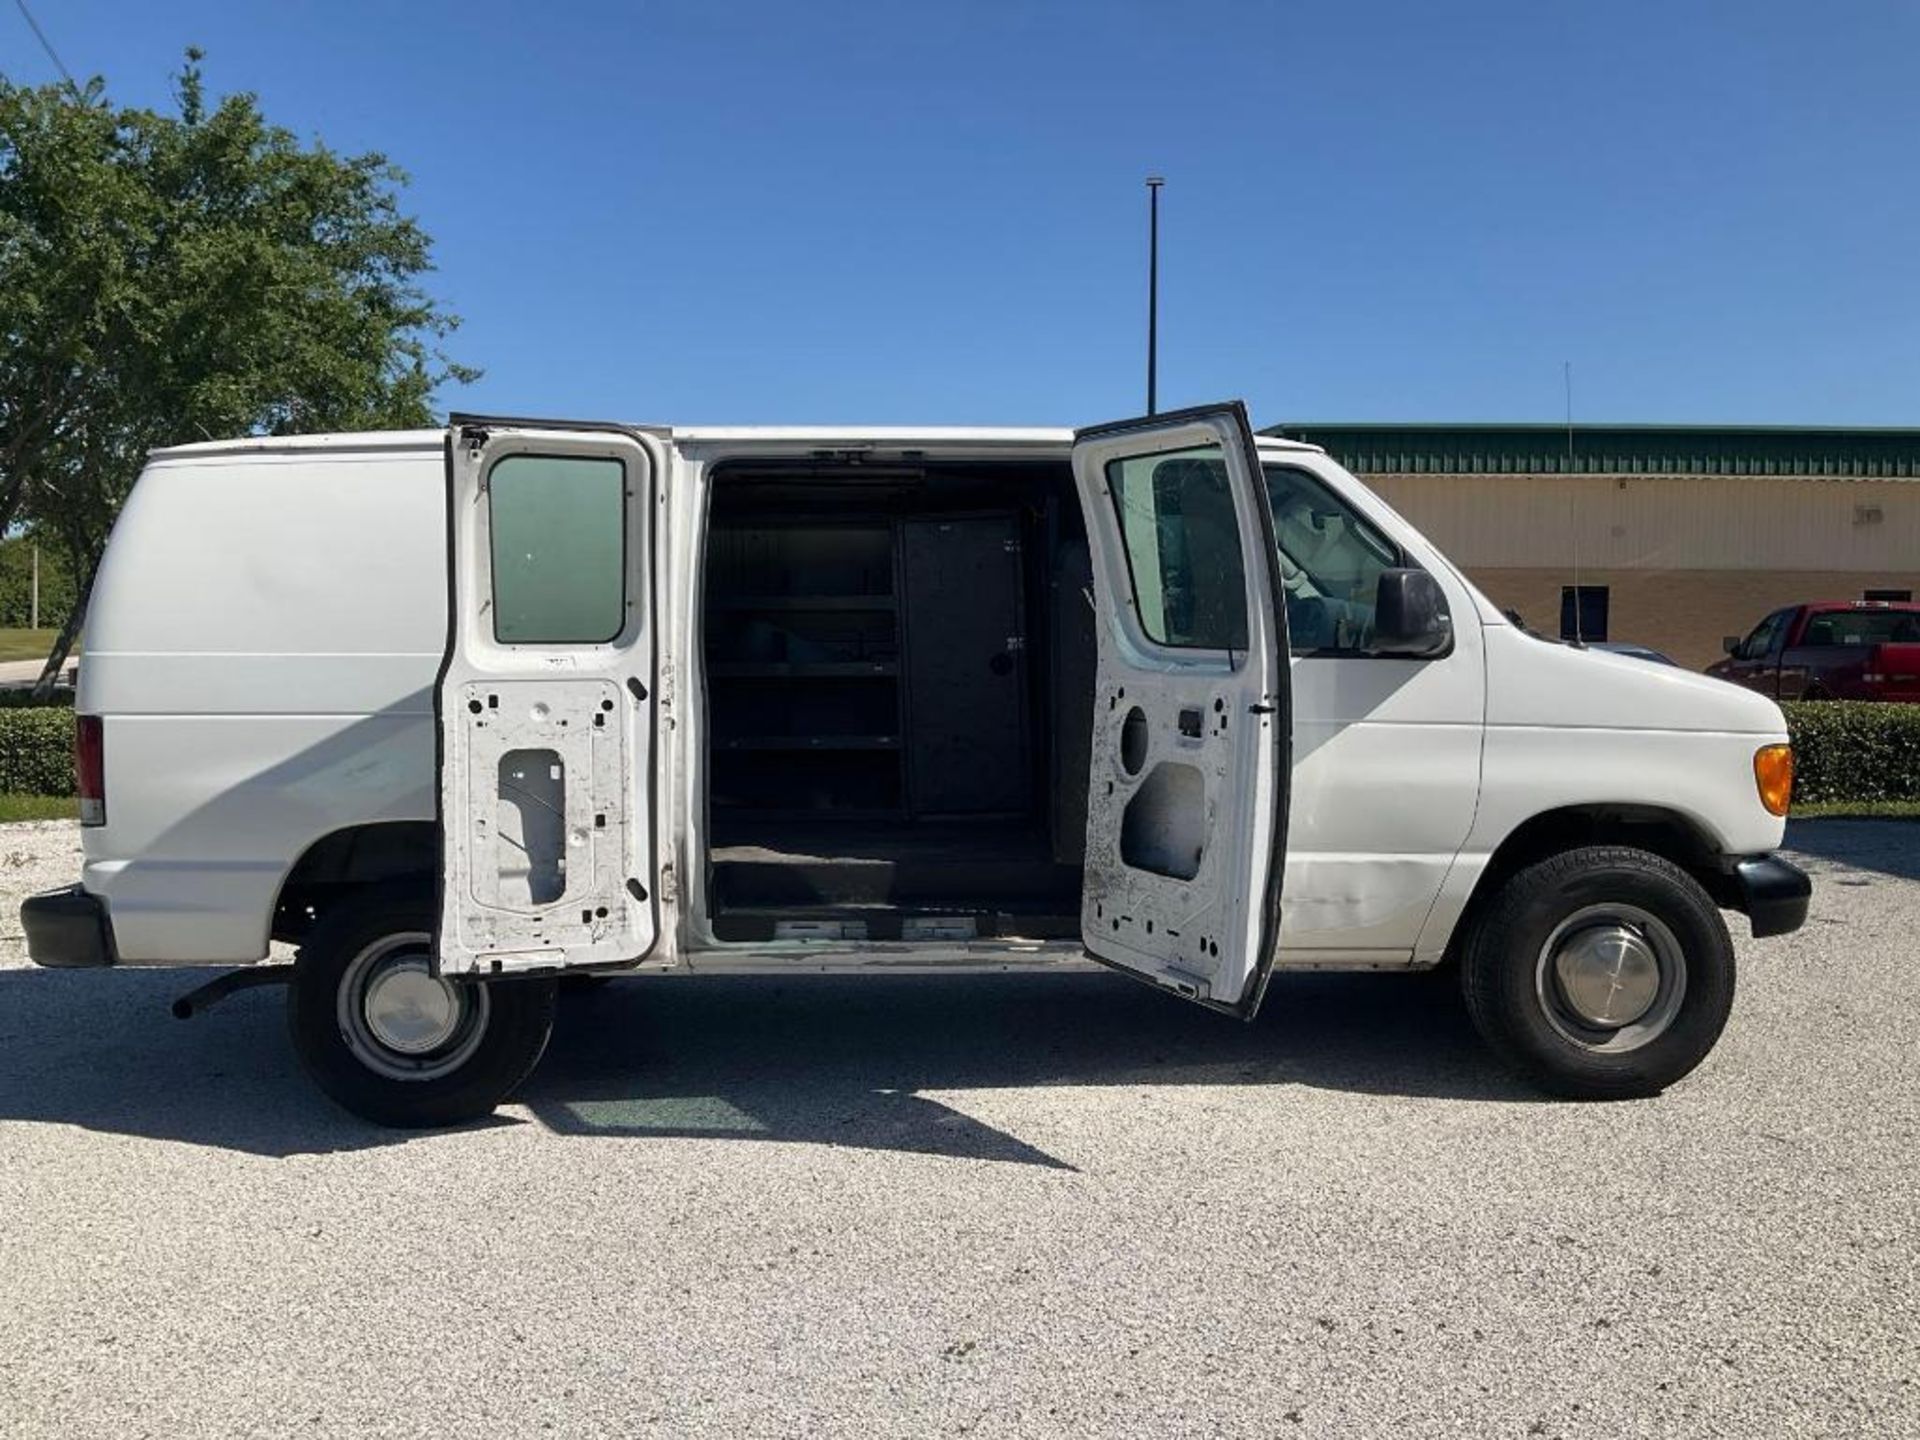 2003 FORD E-SERIES CARGO VAN, APPROX GVWR 8600LBS, STORAGE UNIT & SHELVES IN BACK , RUNS & DRIVES - Image 20 of 28